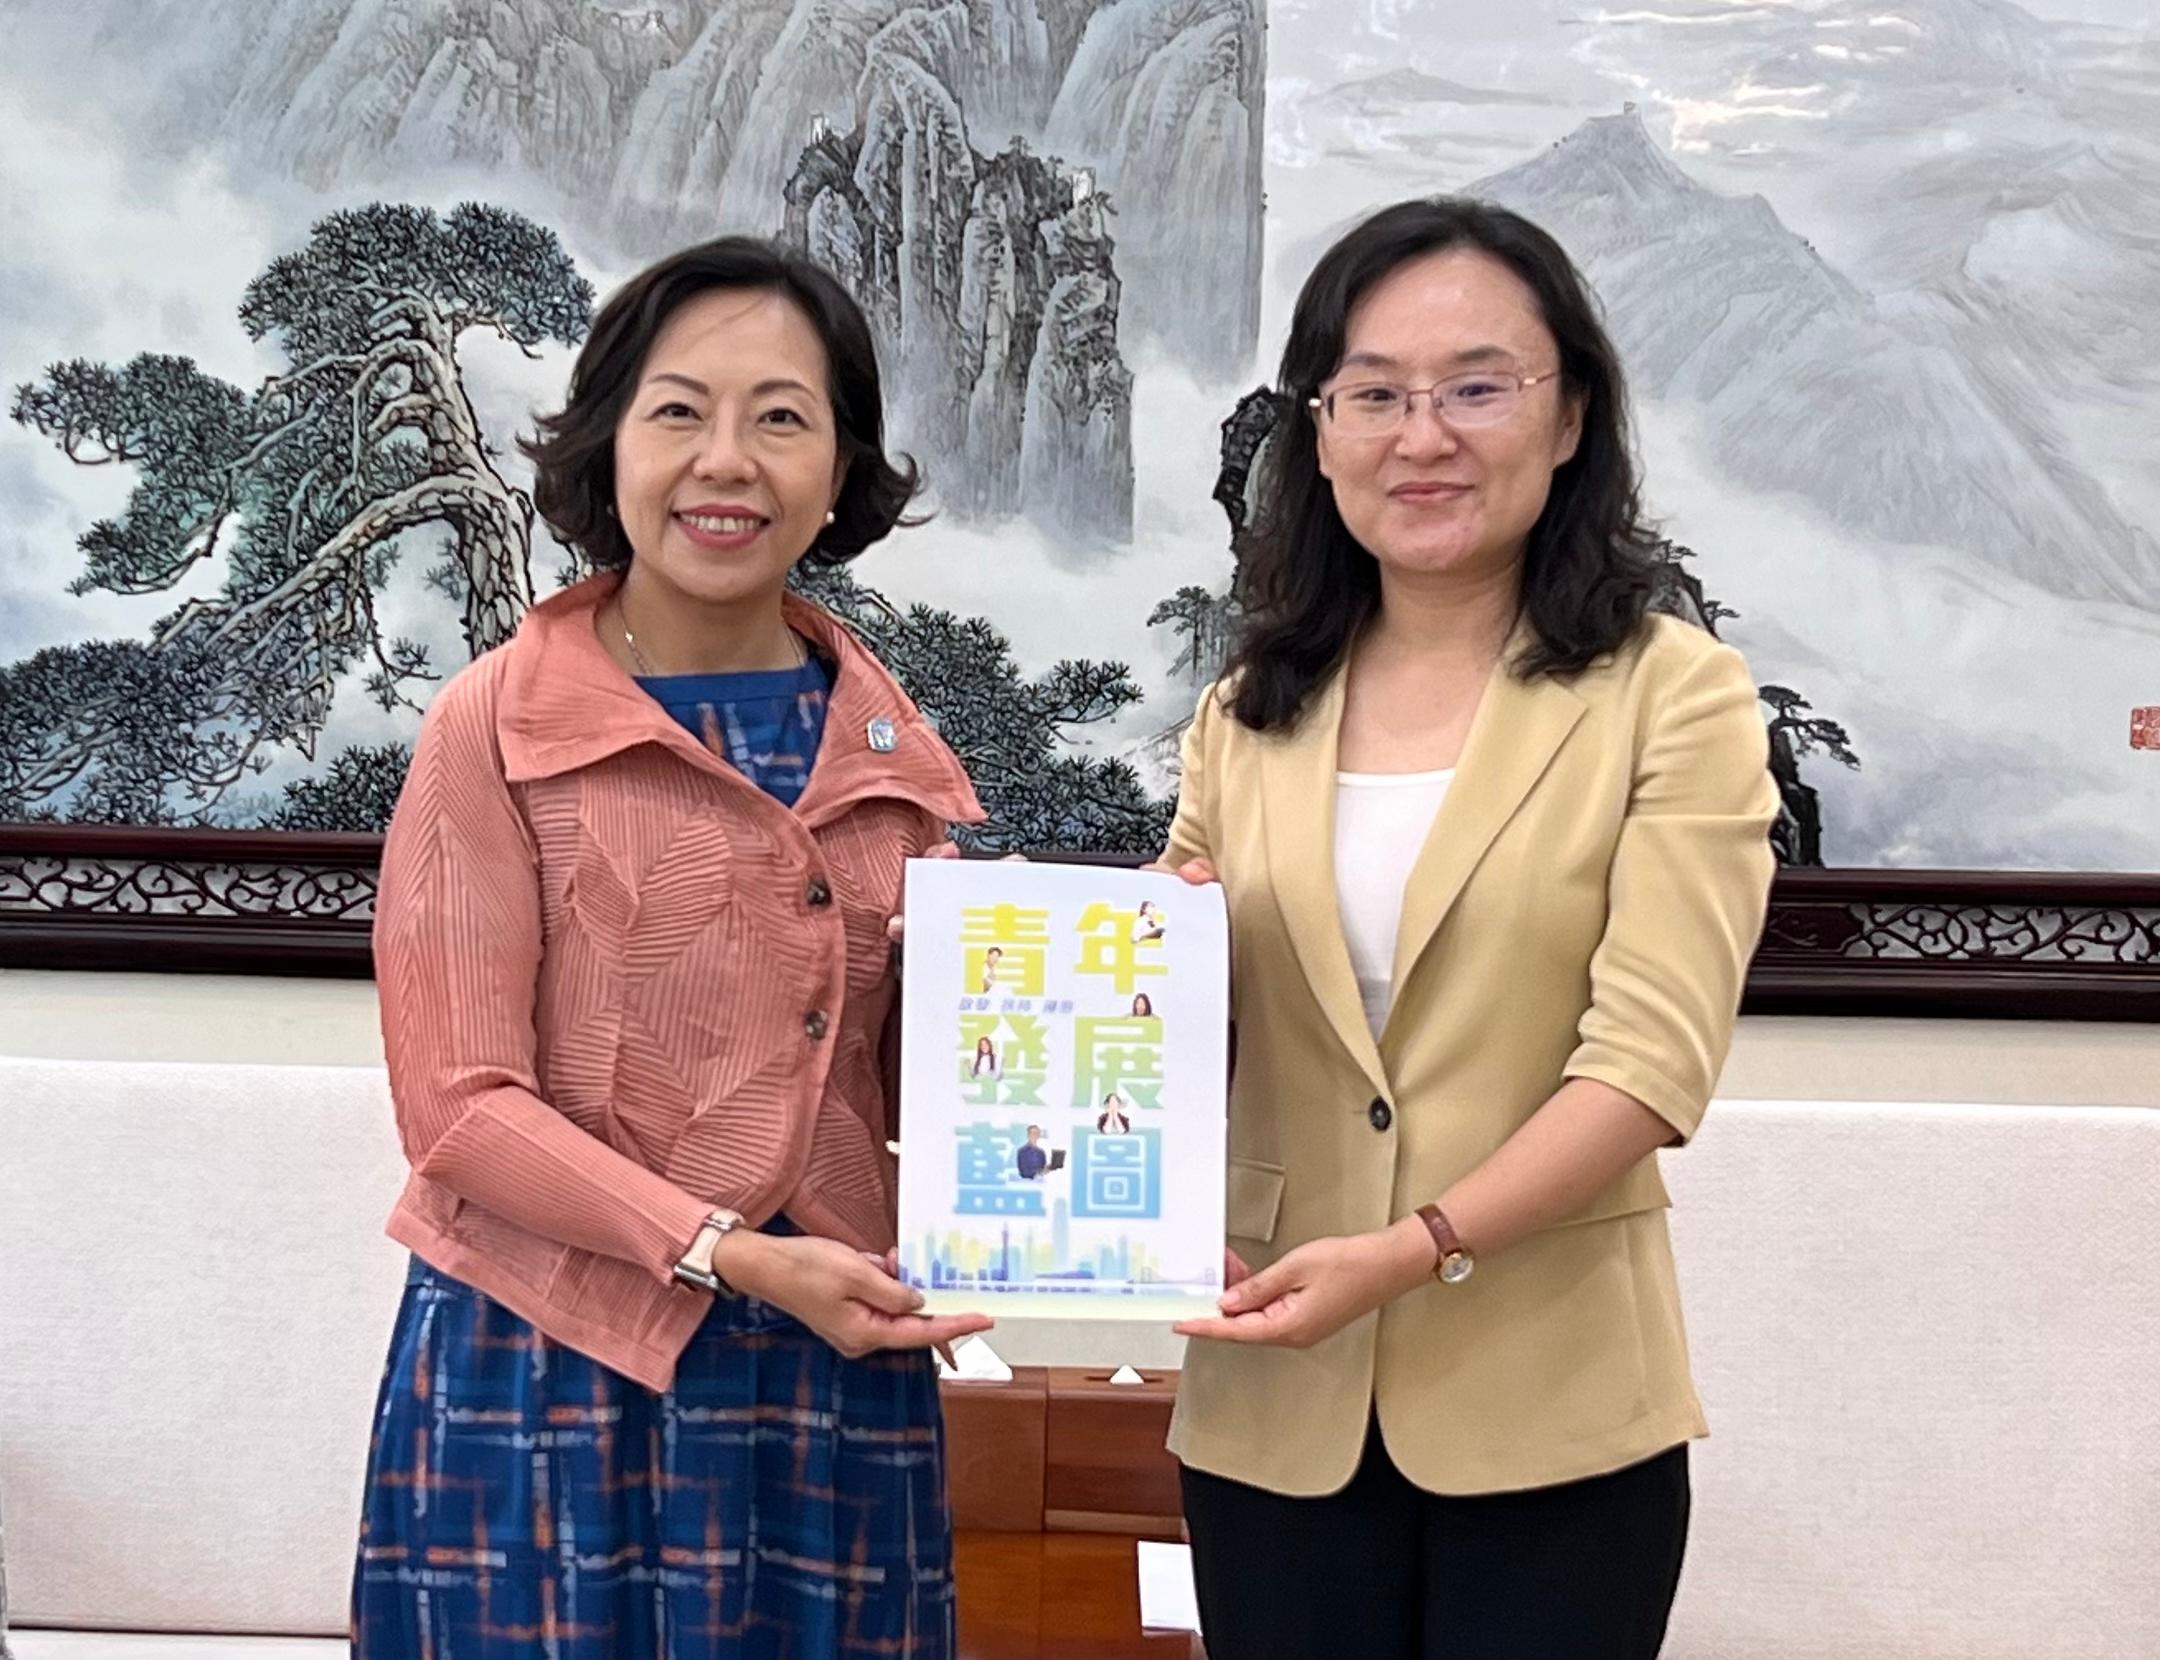 The Secretary for Home and Youth Affairs, Miss Alice Mak, continued her visit in Beijing today (July 17) and visited the All-China Youth Federation (ACYF). Photo shows Miss Mak (left) meeting with the person-in-charge of the ACYF, Ms Wang Yi (right), to exchange views on work, including helping Hong Kong youths integrate into the overall development of the country and further encouraging youth exchanges between the Mainland and Hong Kong.
